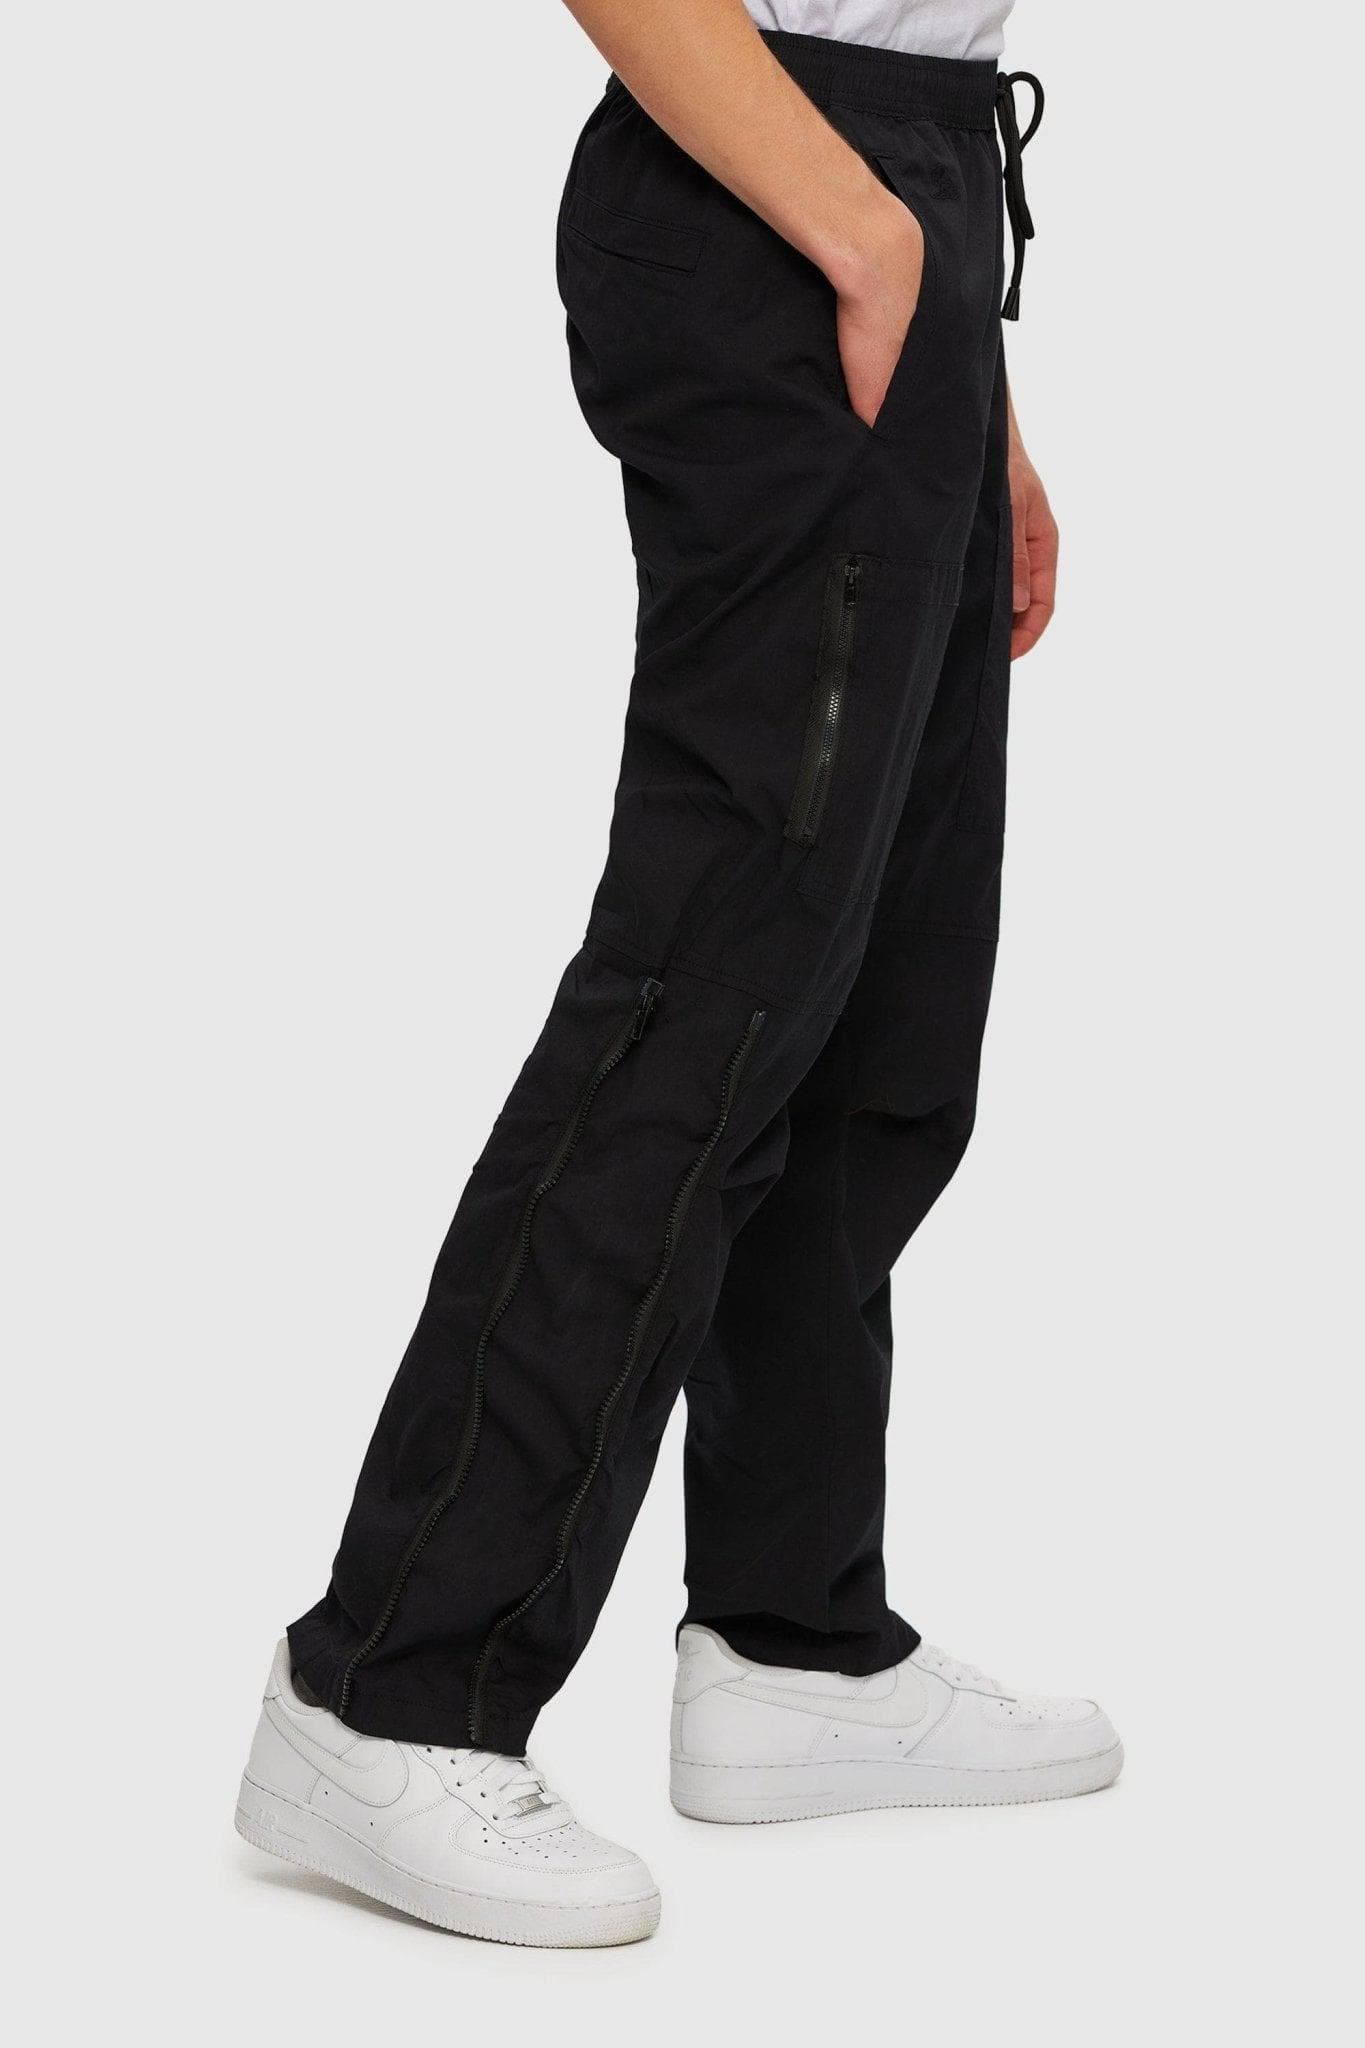 Parachute pants adjustable at the waist and ankles – Frilivin